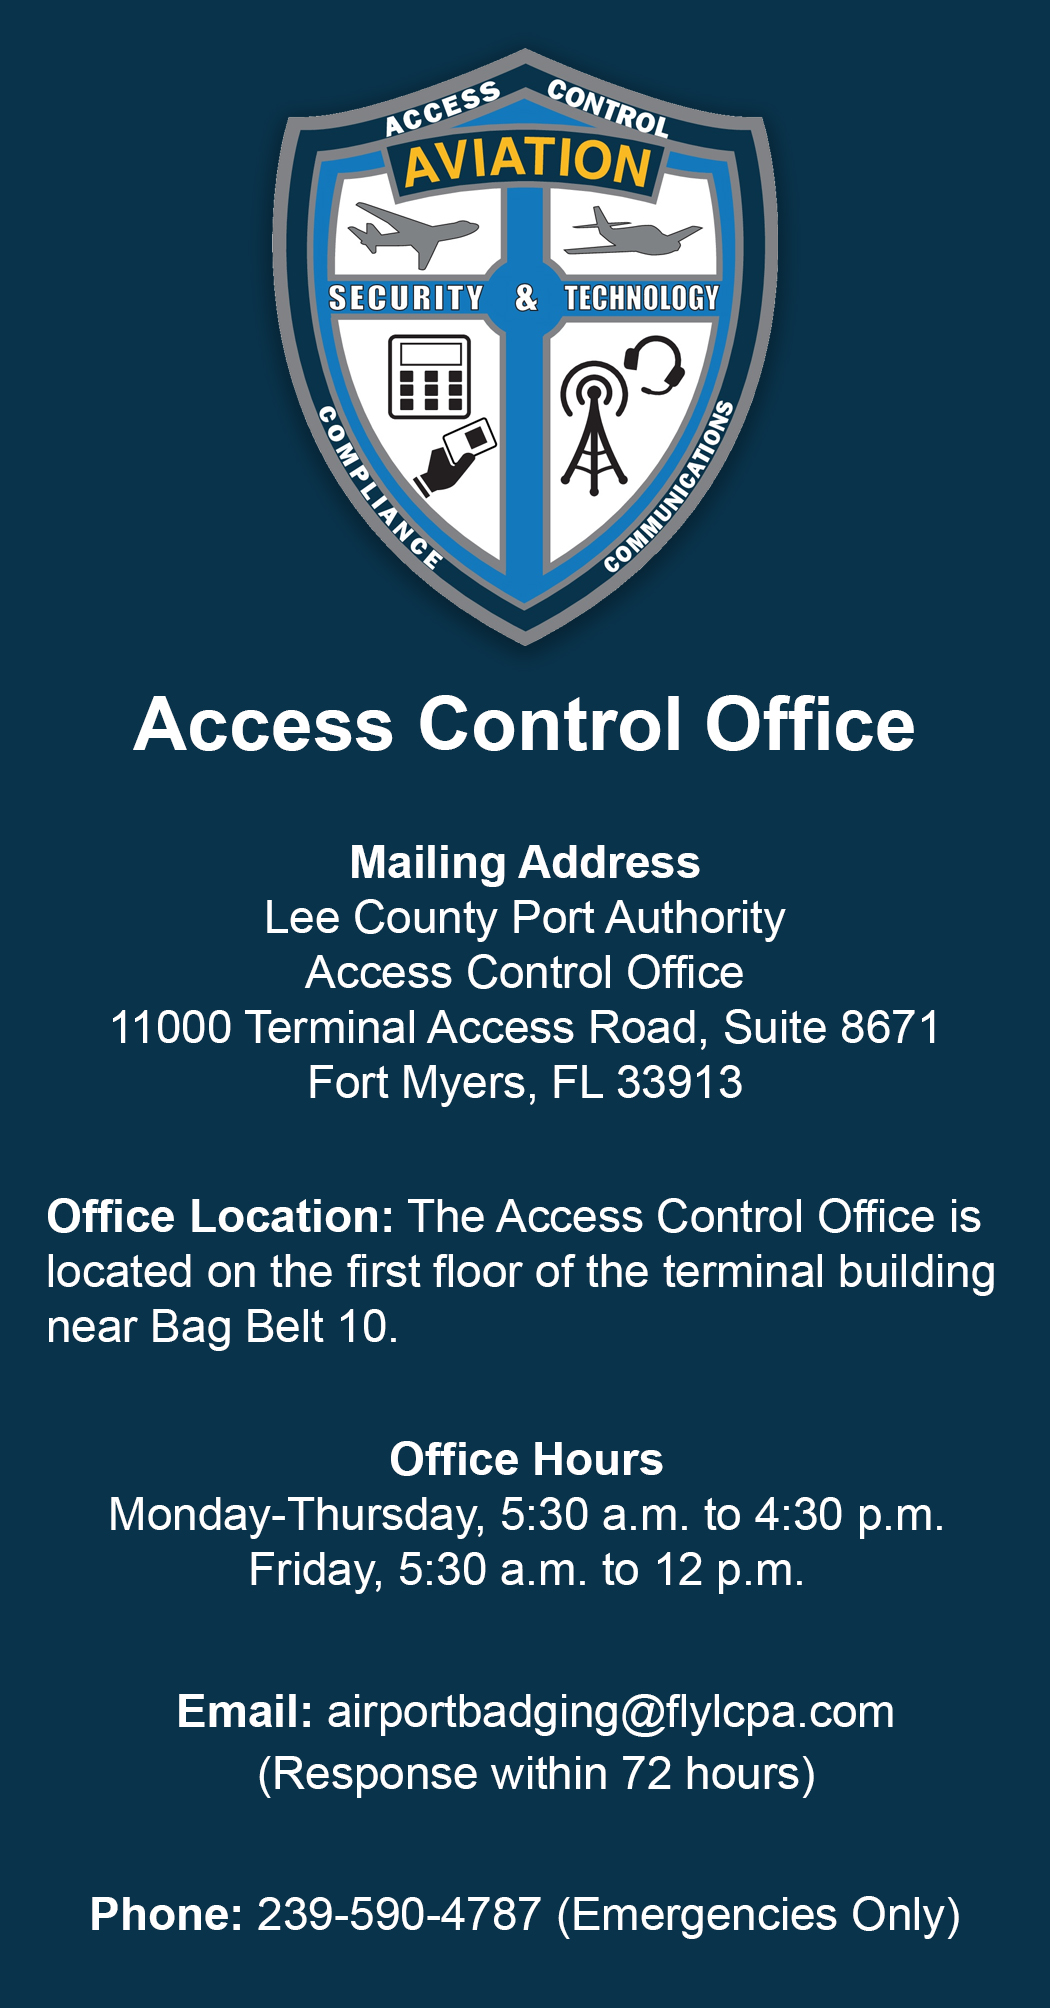 Access Control Office